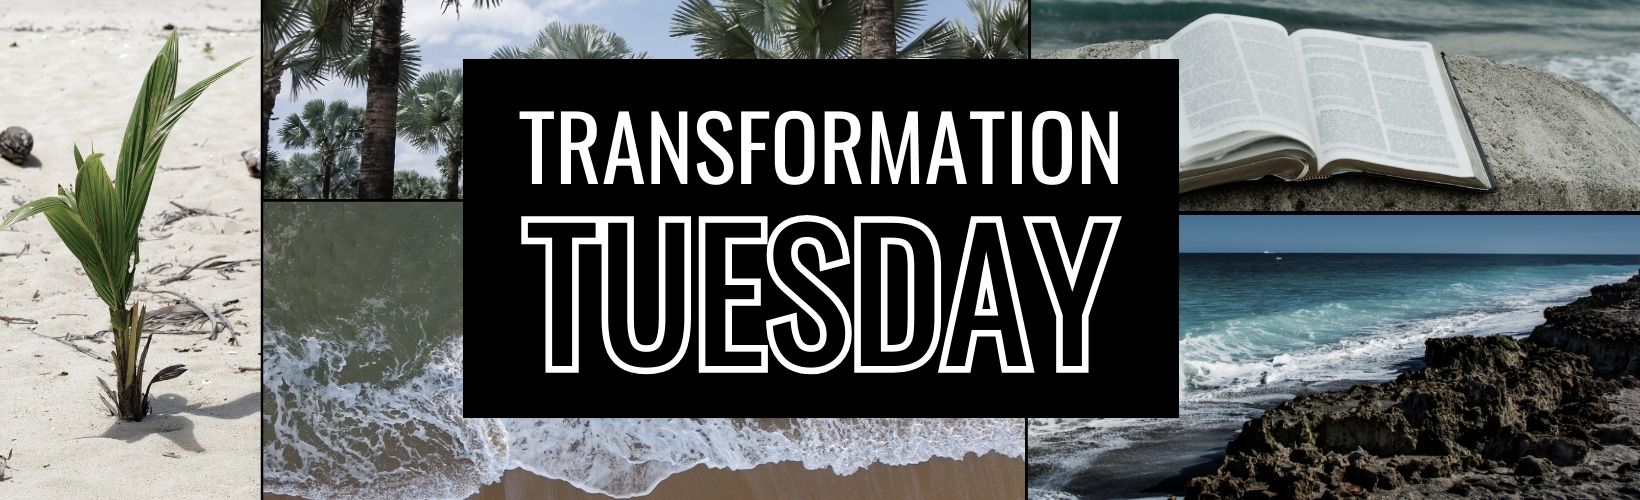 Transformation Tuesday: How to Transform Your Body and Enhance Your Health